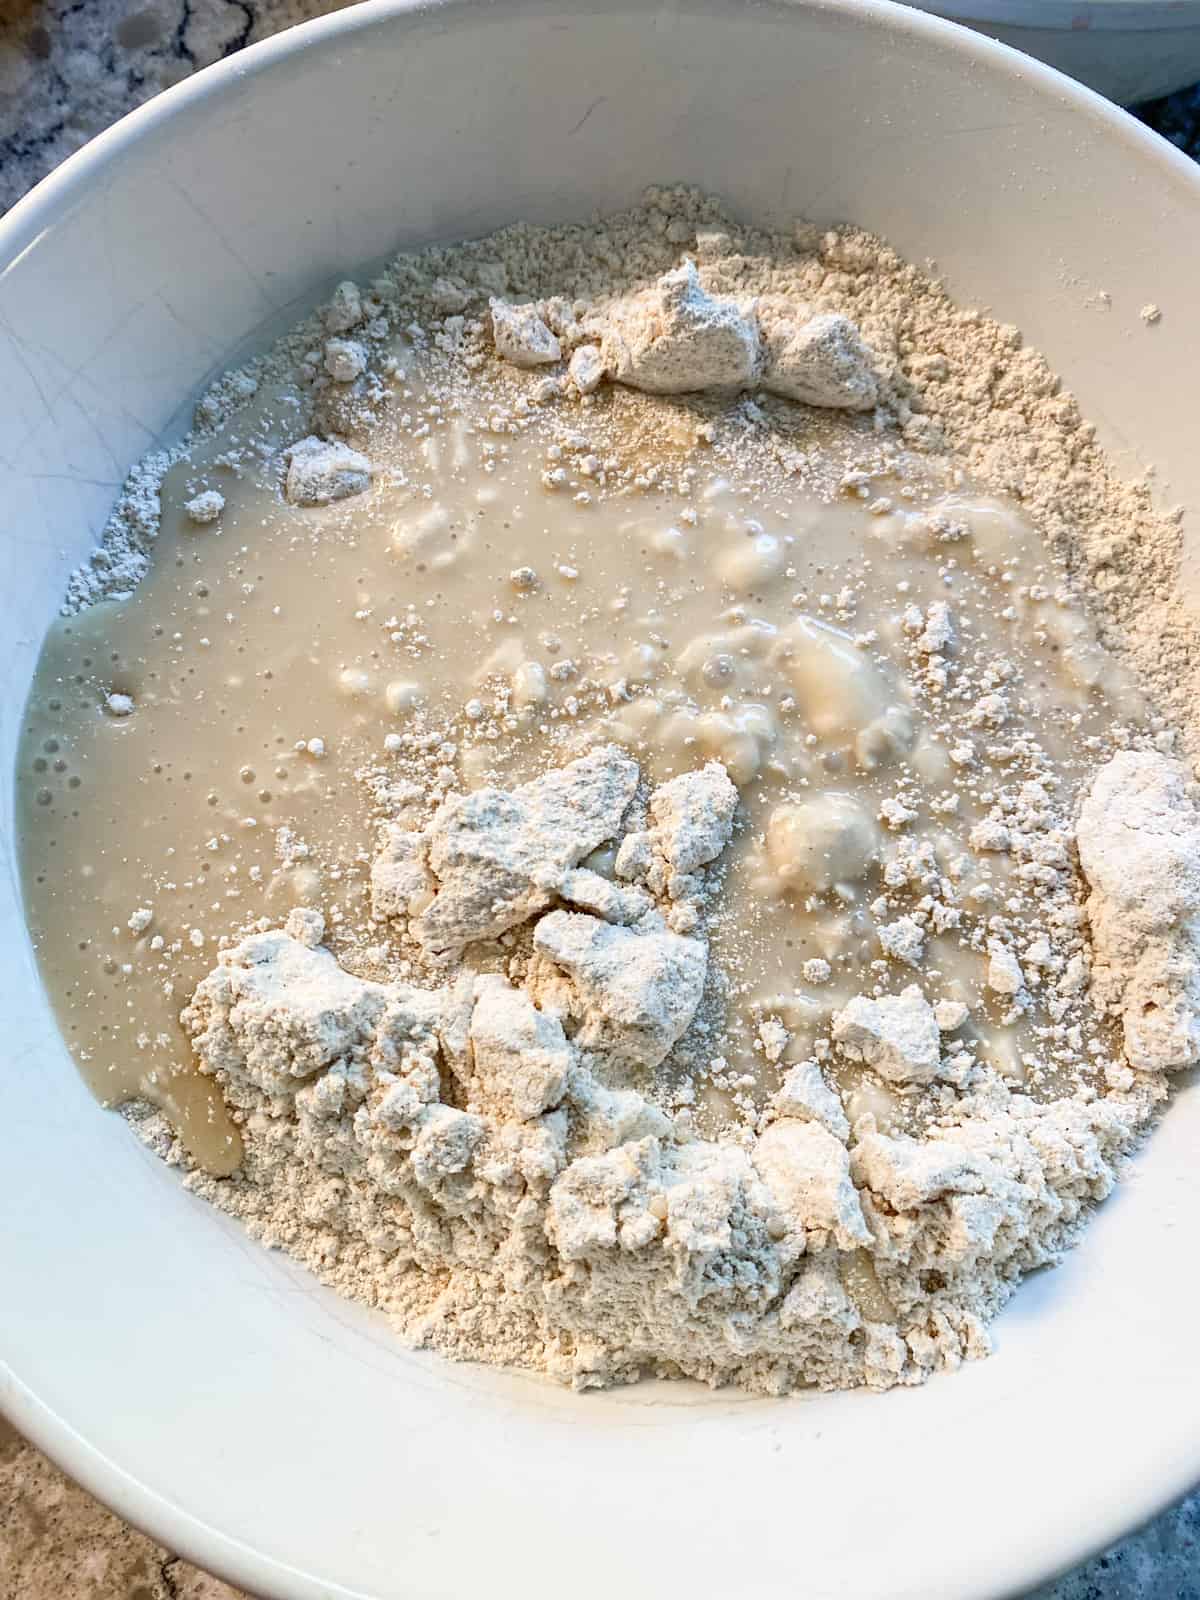 Wet ingredients poured into dry ingredients.